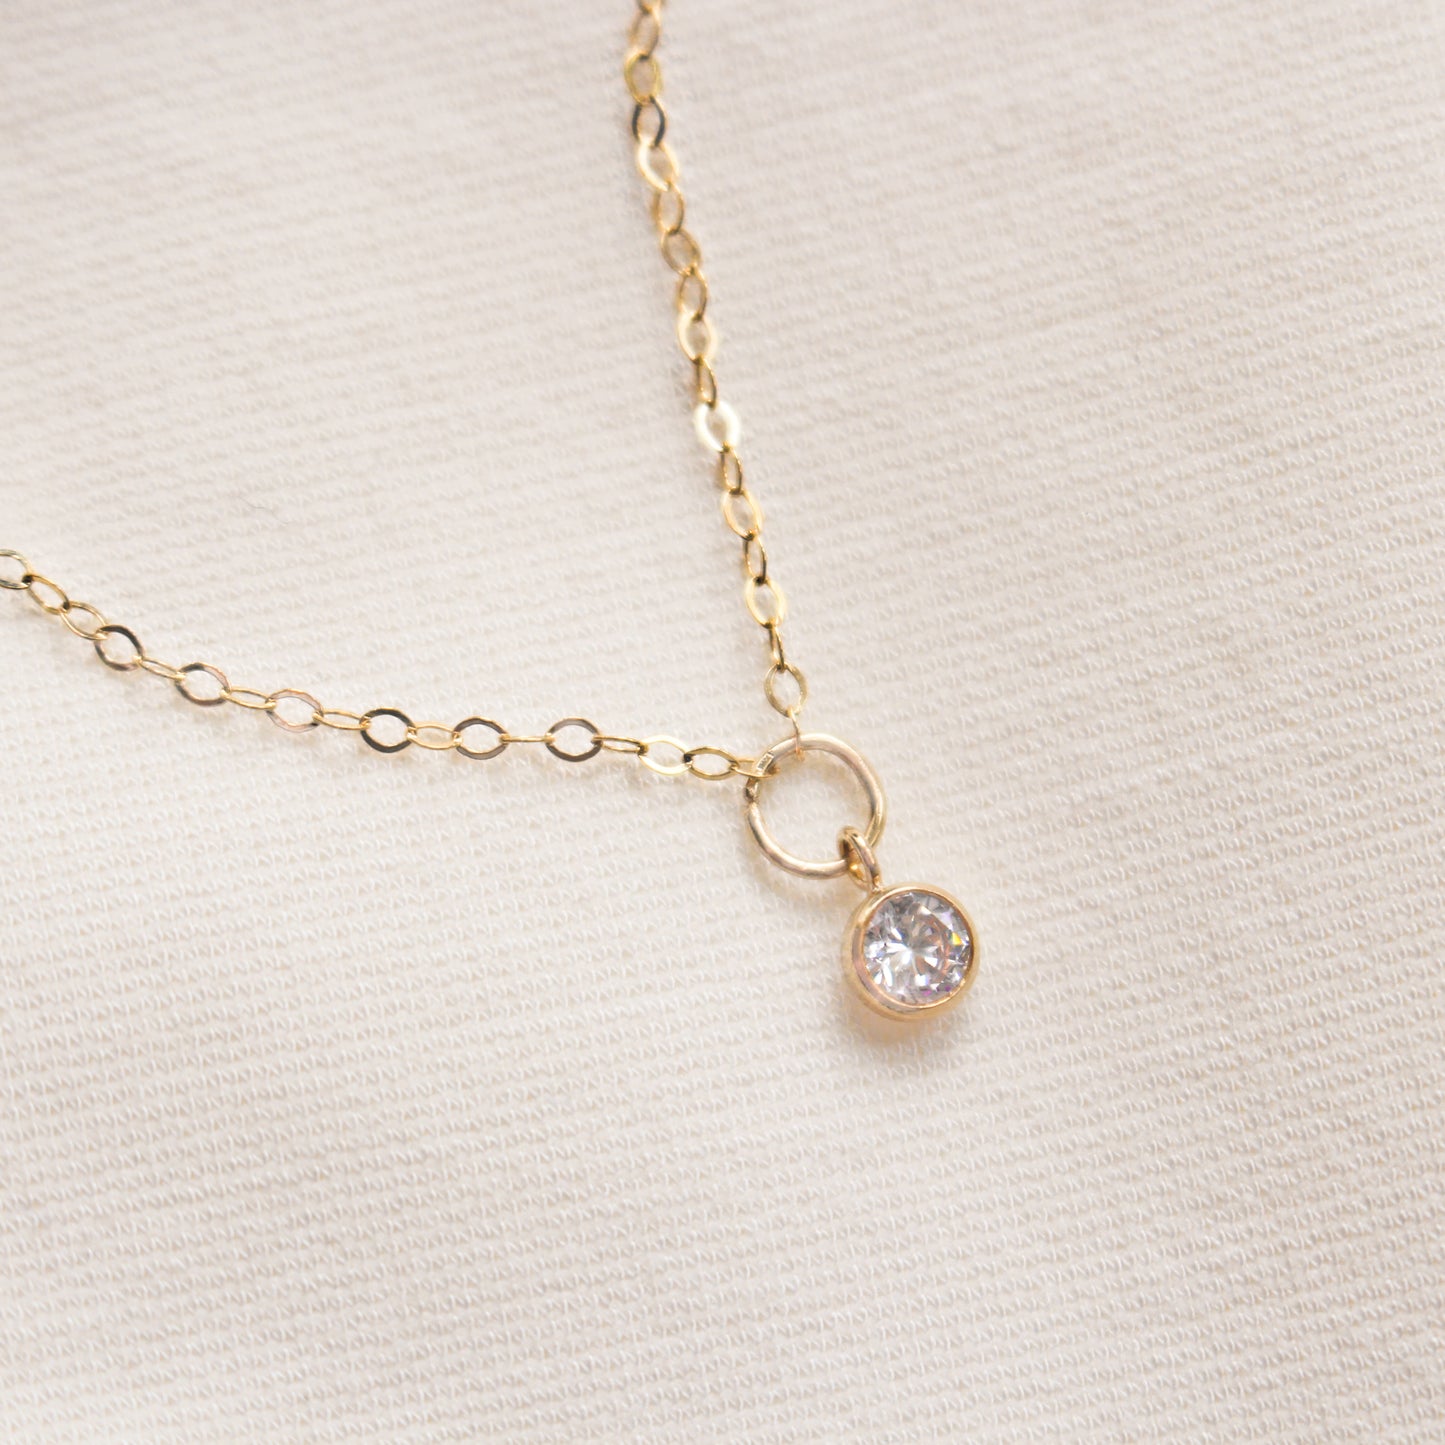 14K Gold Filled Drop Round Zircon Necklace ∙ Dainty Clear Cubic Zirconia Pendant